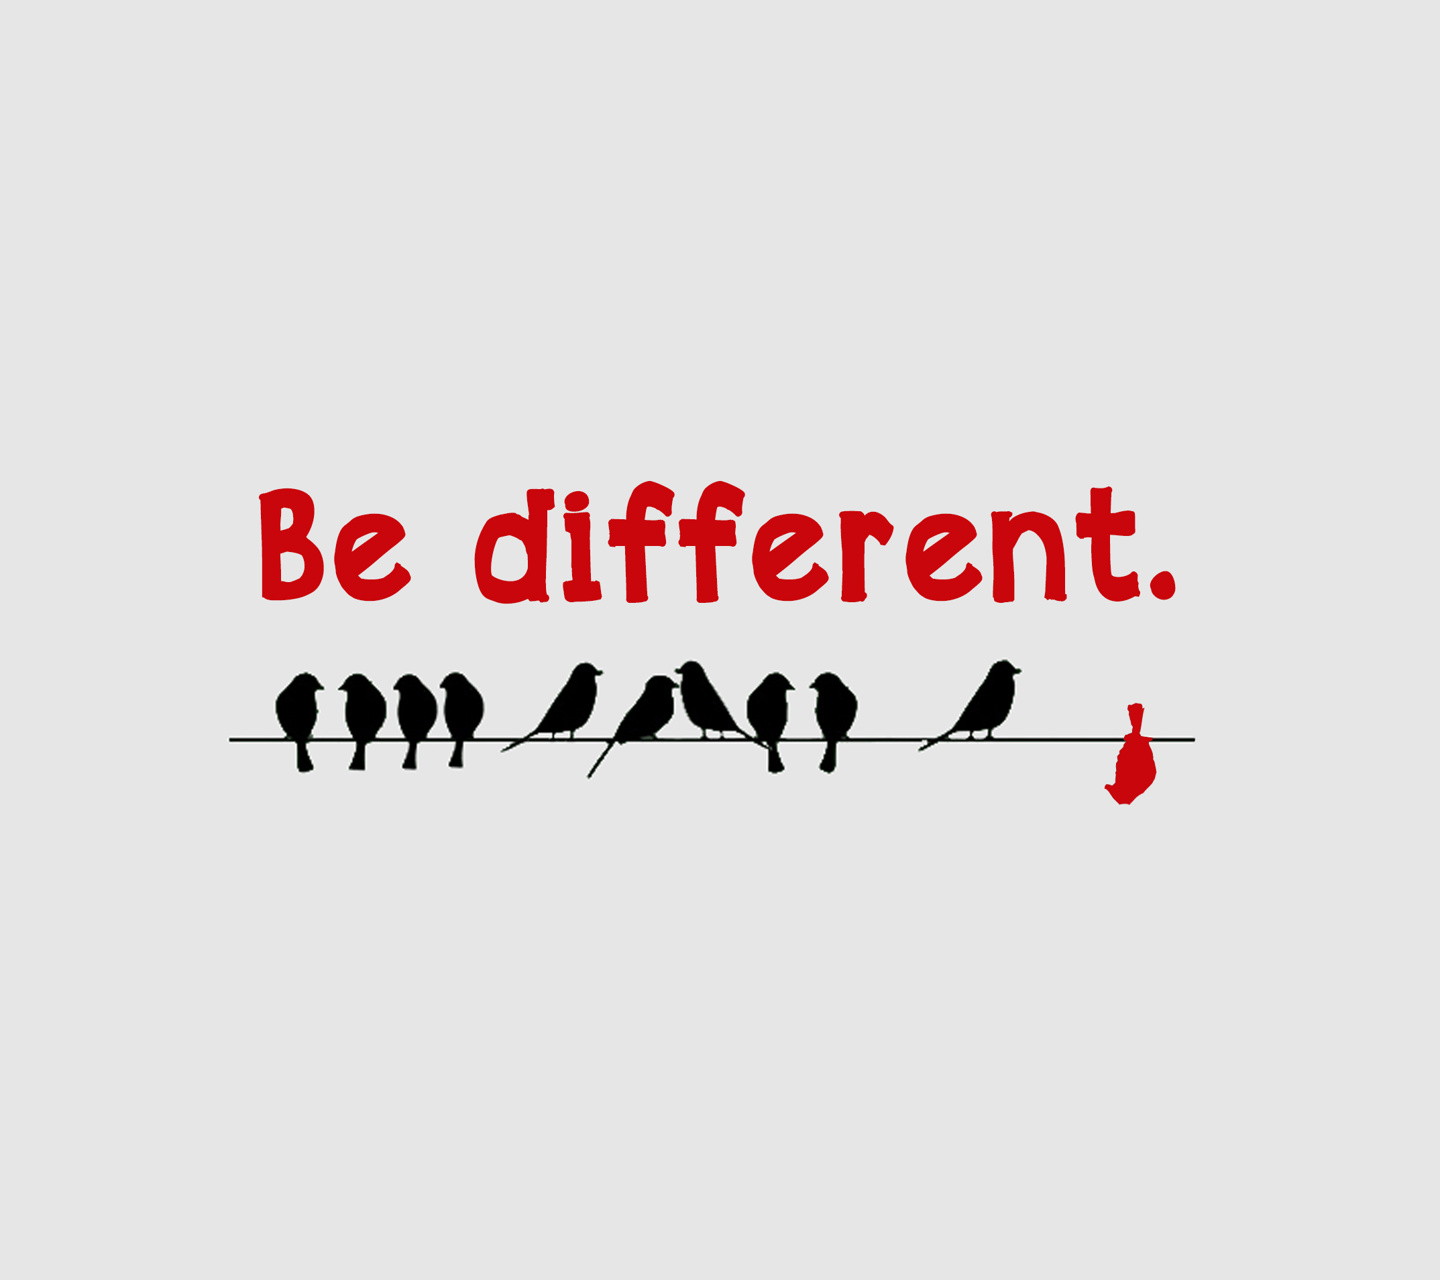 Allow to be different. Be different. Надпись different. Be different надпись. Логотип be different.